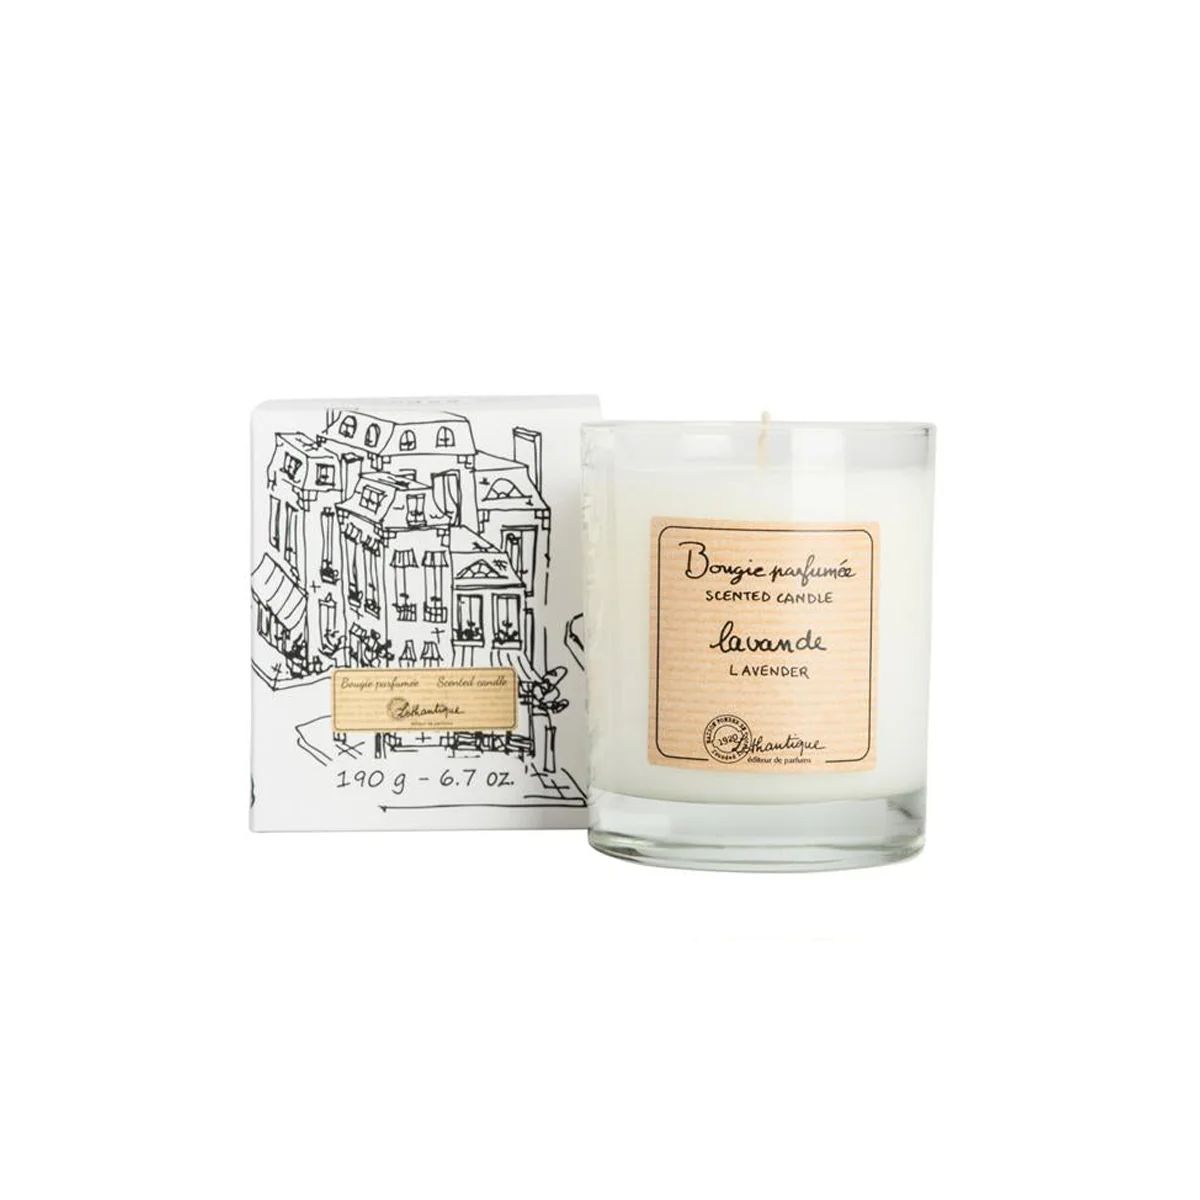 Lothantique Candle | Tuesday Made